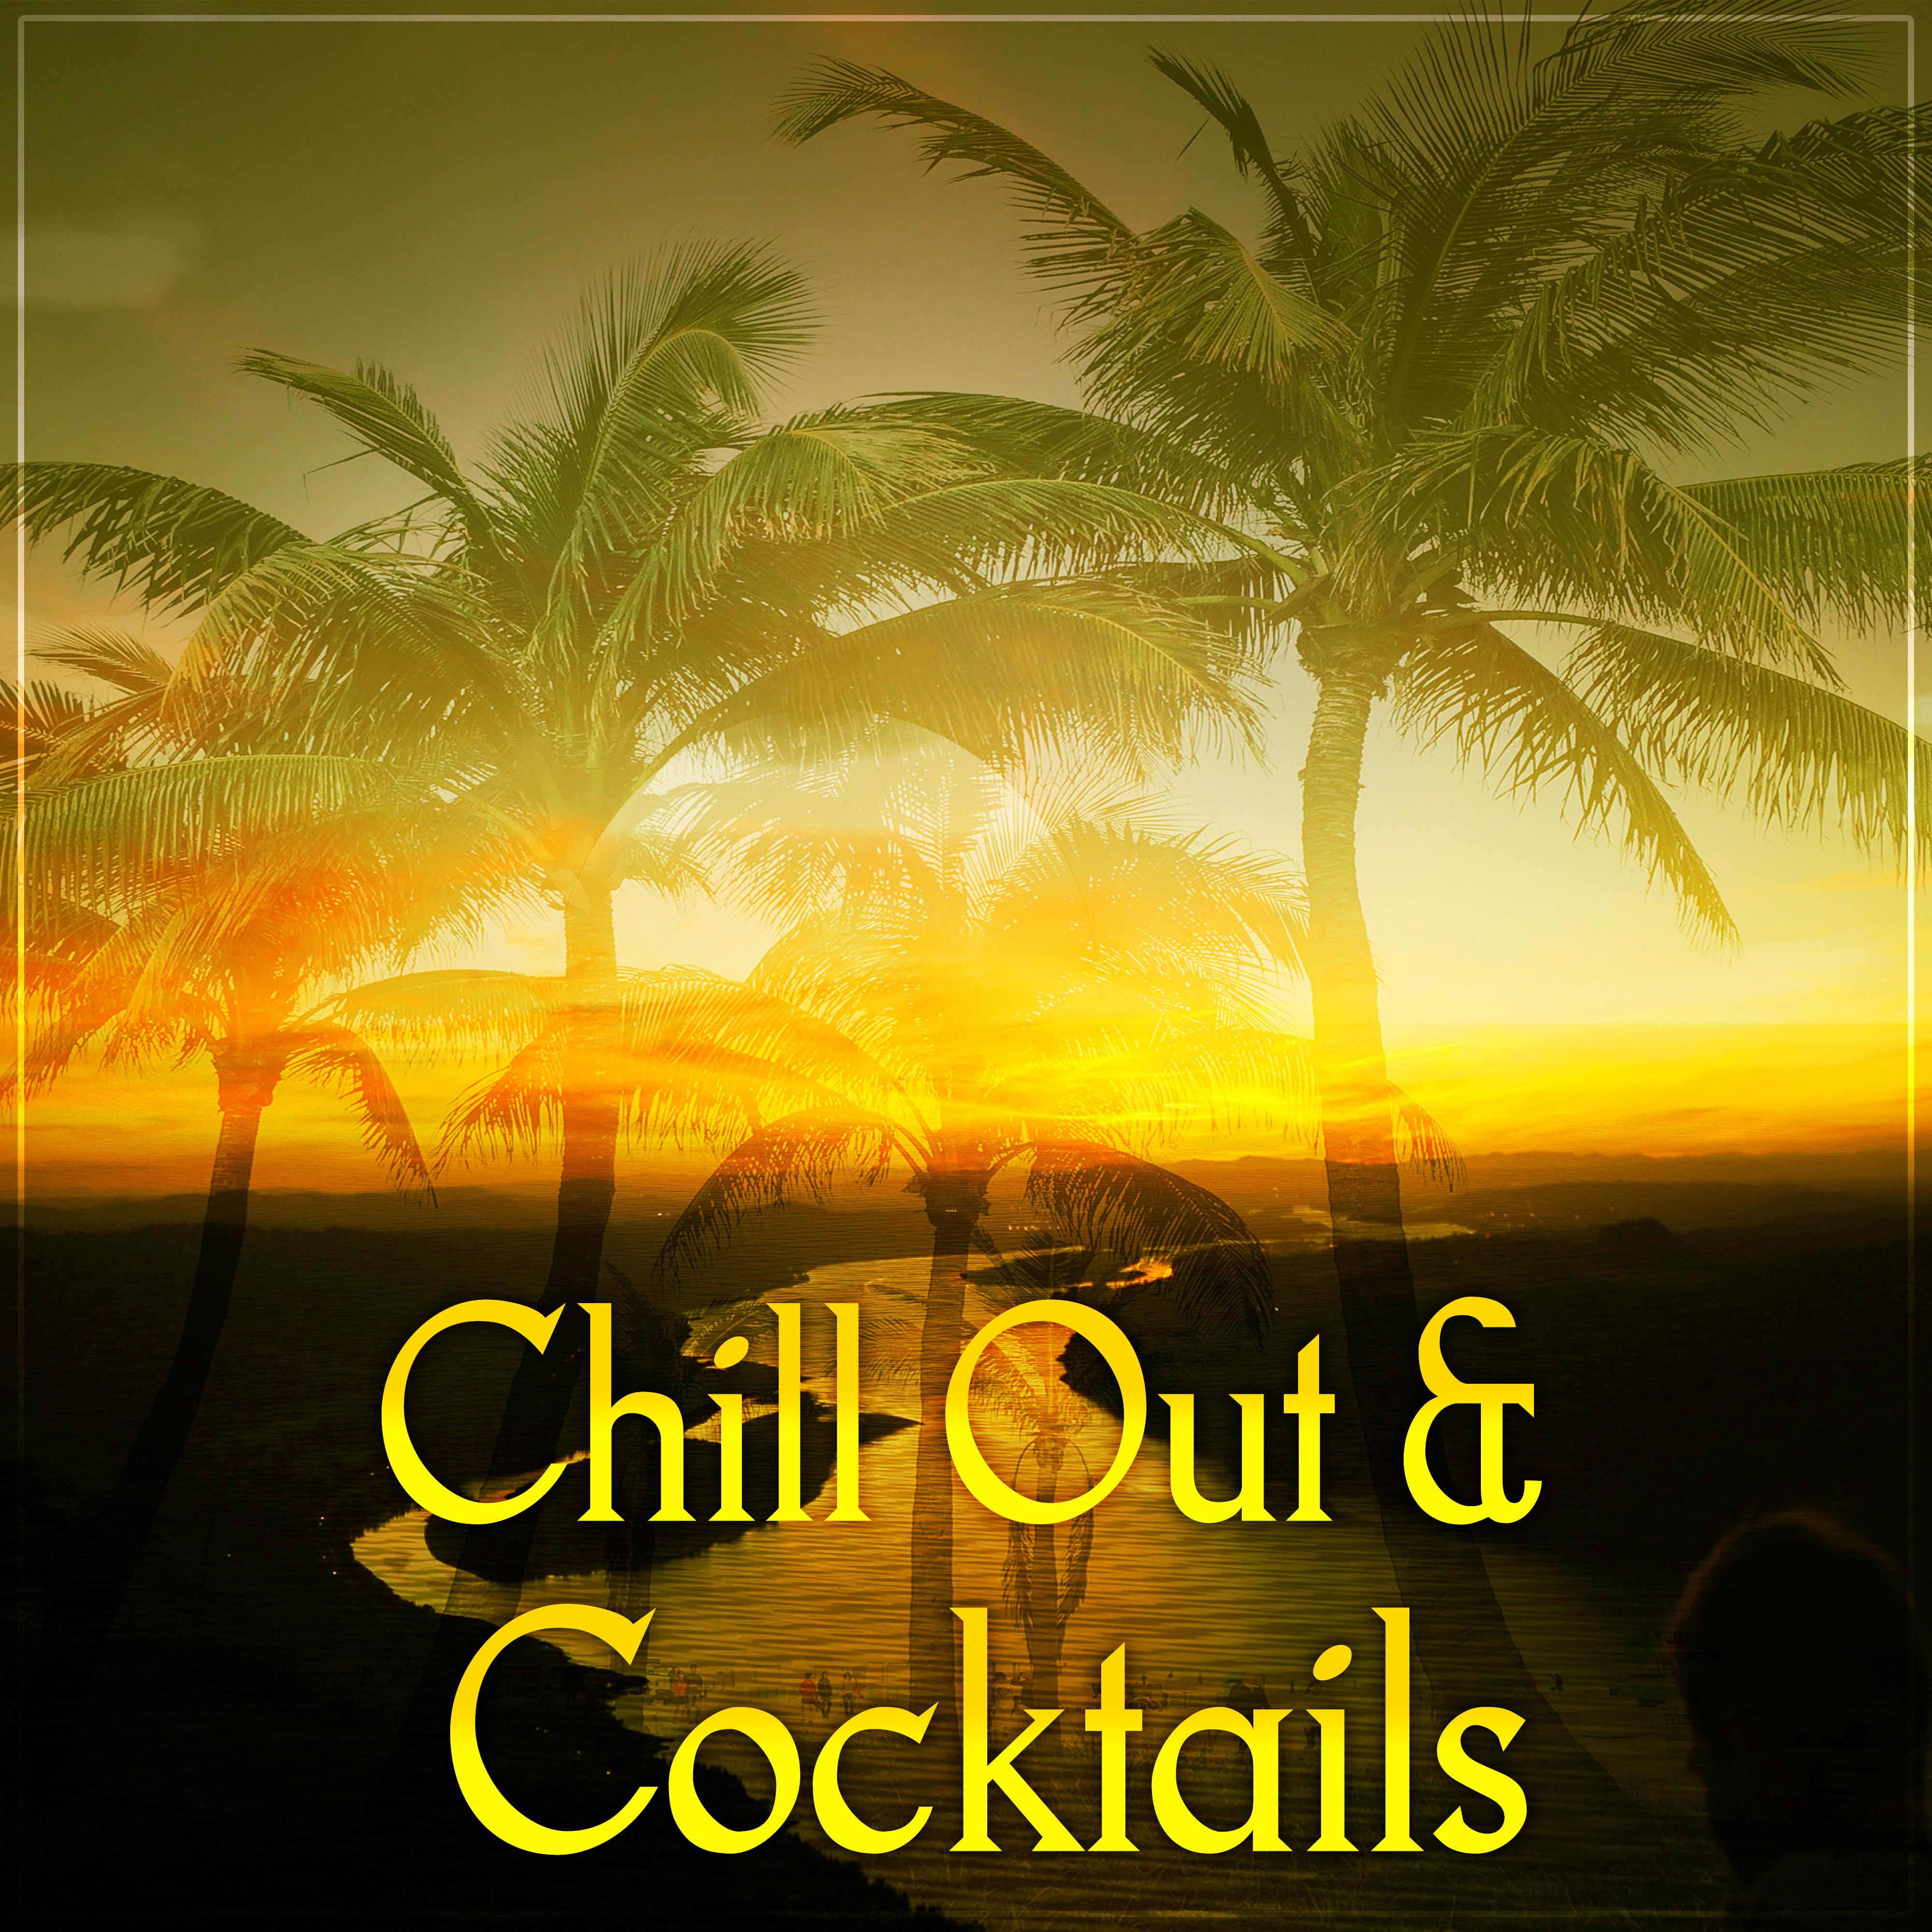 Chill Out & Cocktails – Drink, Smoke & Chill Out, Total Relaxation with Chill Out Sounds